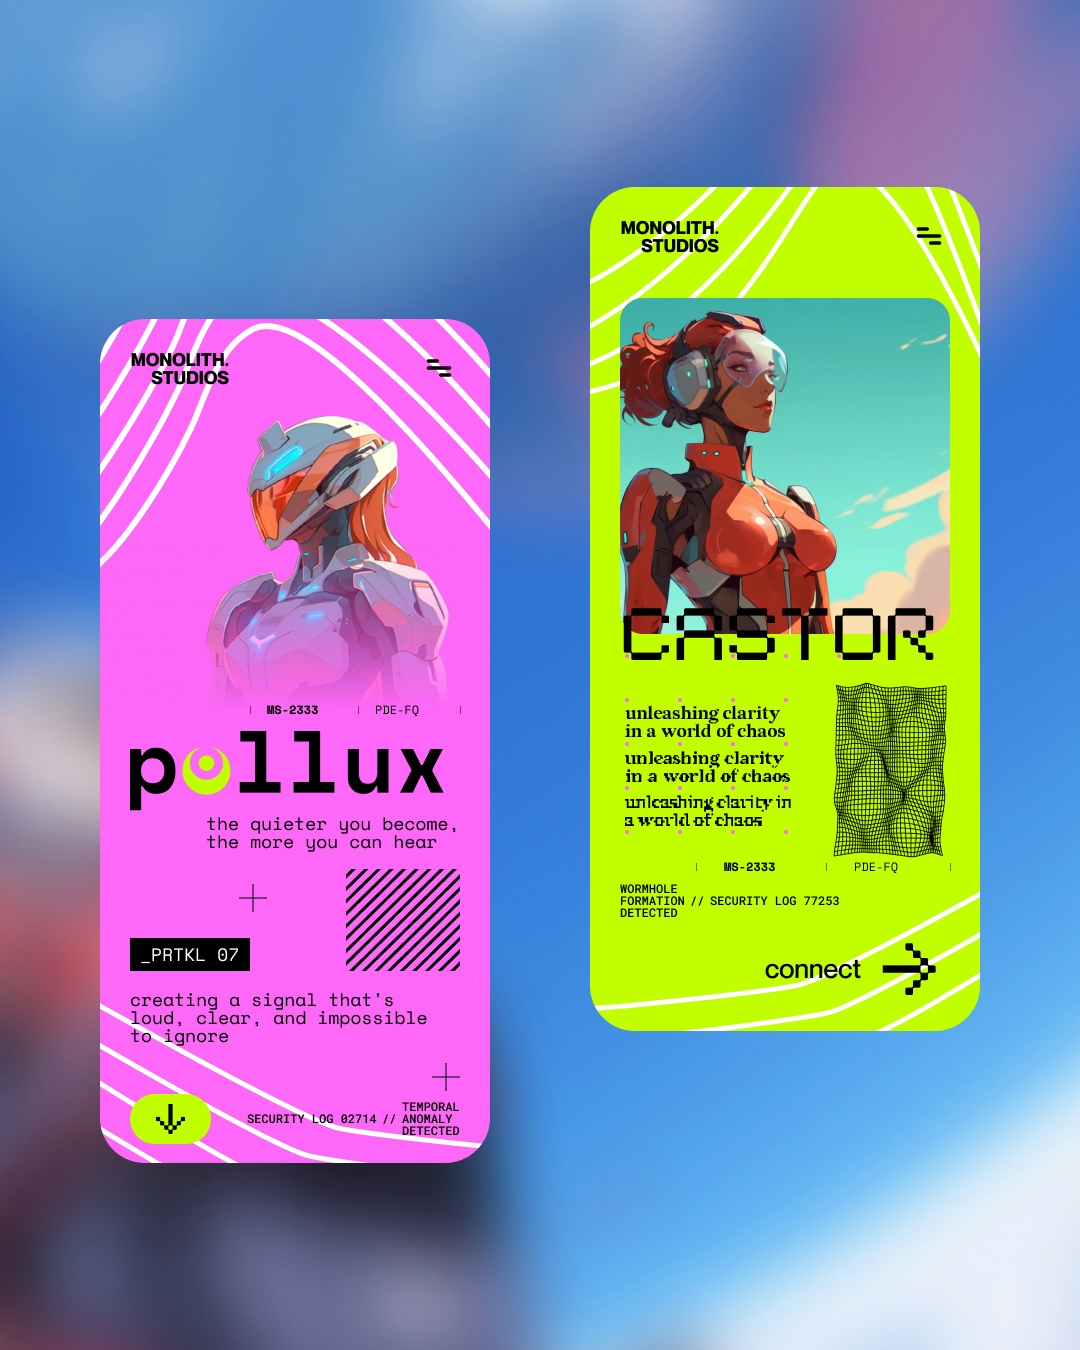 castor & pollux project image